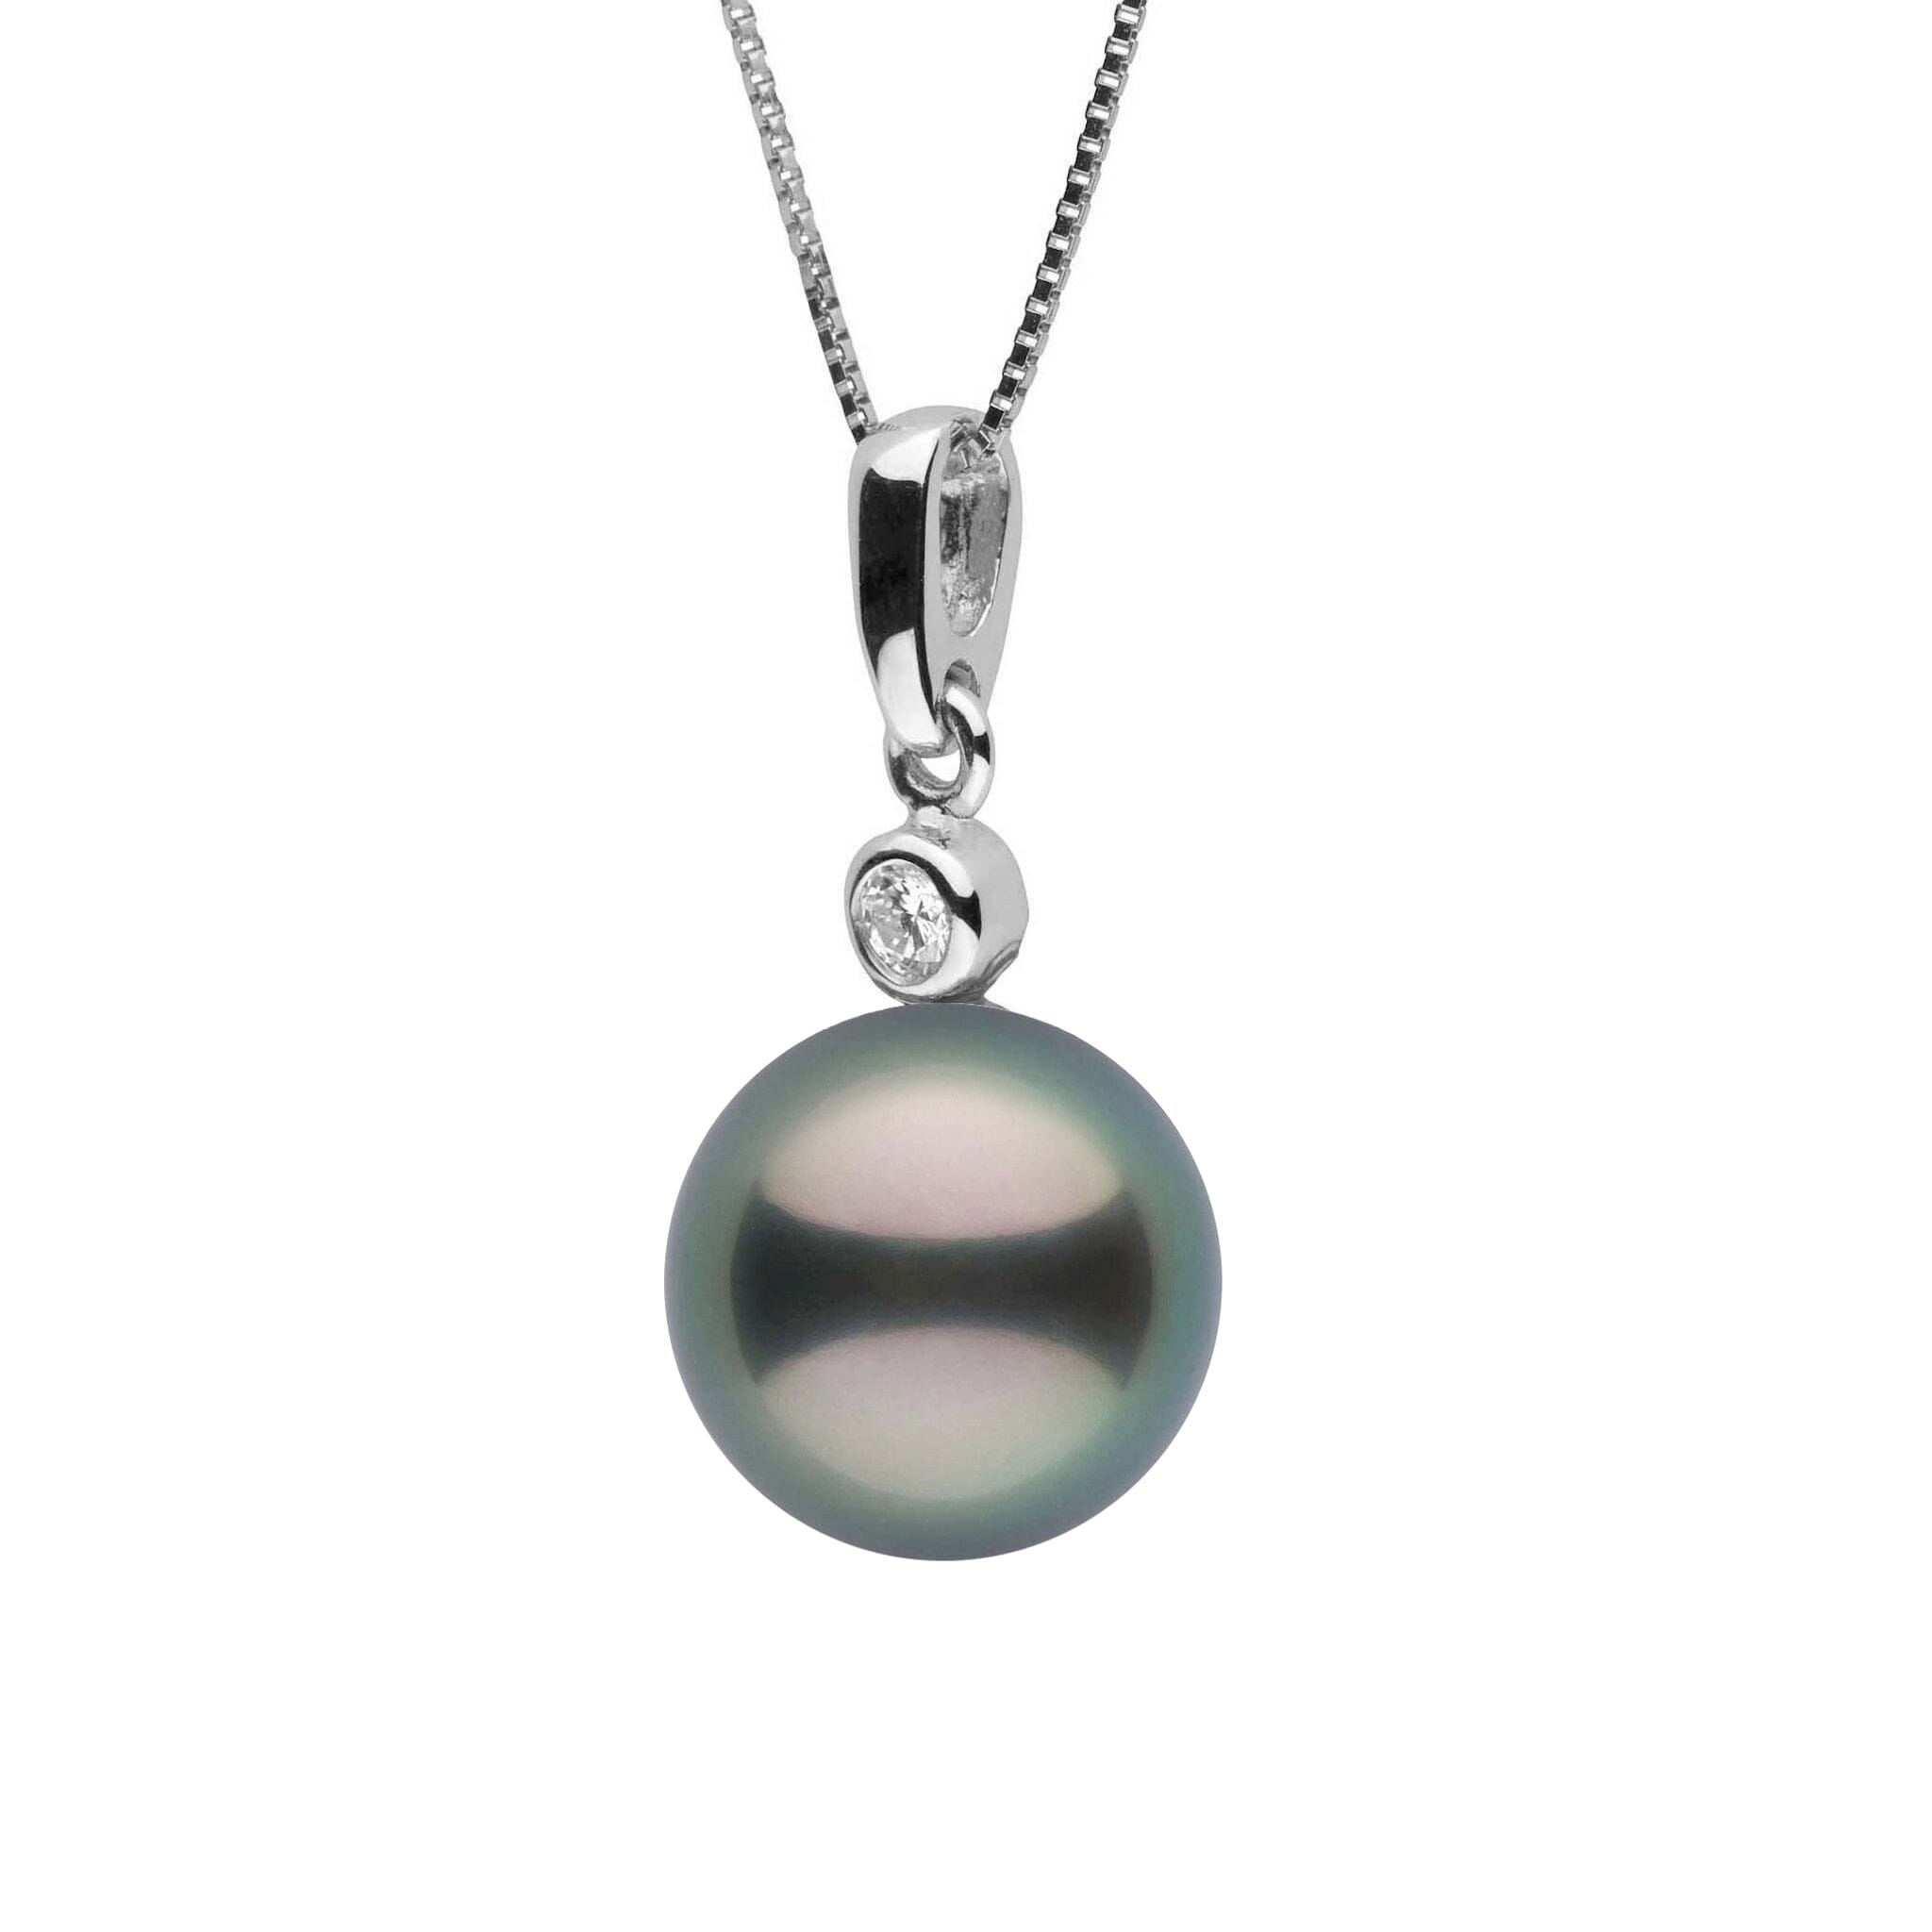 Brilliant Collection 8.0-9.0 mm Tahitian Pearl and Diamond Pendant